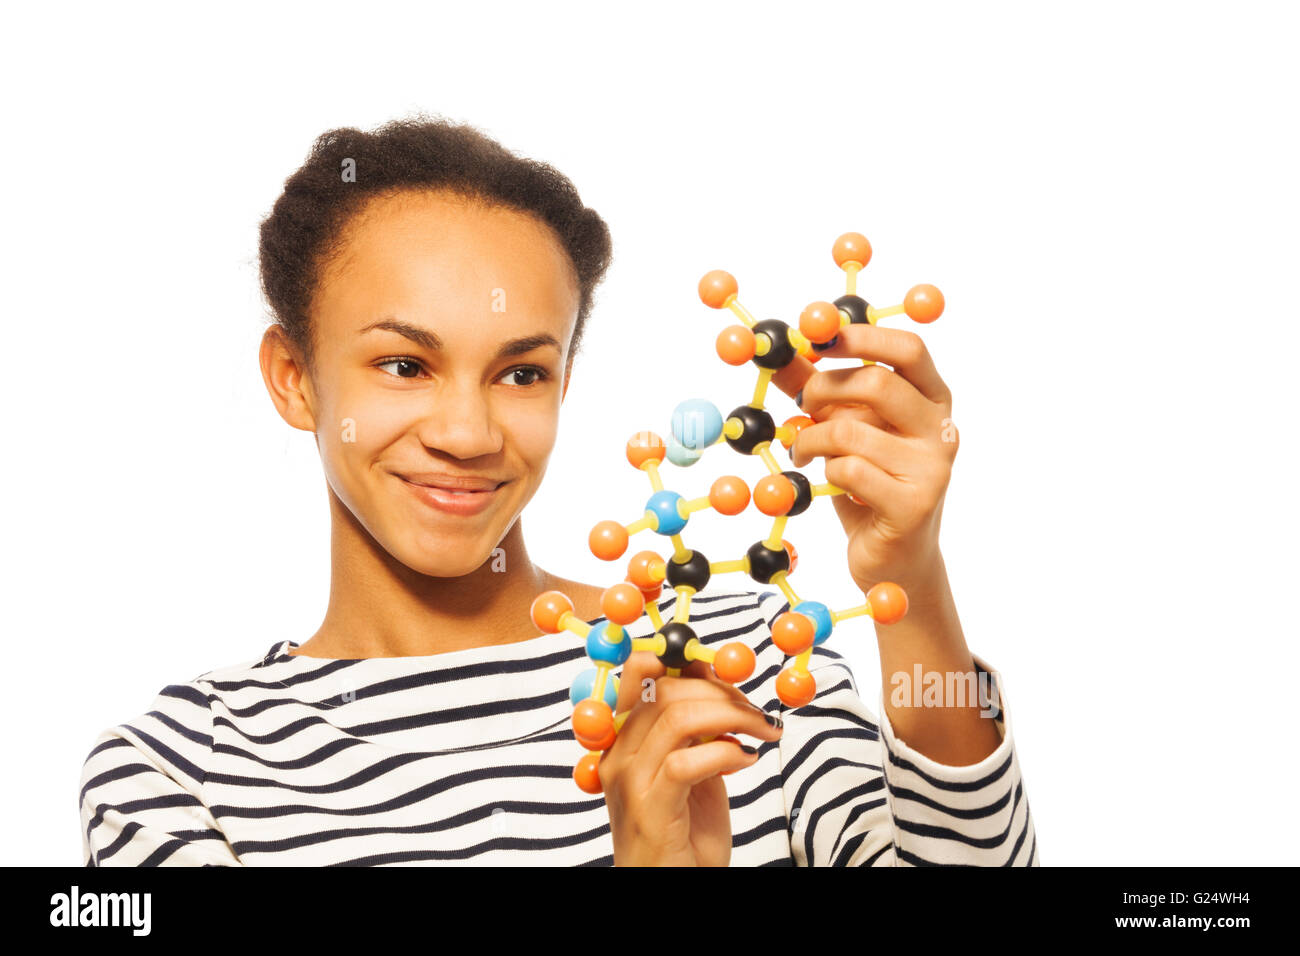 African young girl studying molecular structure Stock Photo